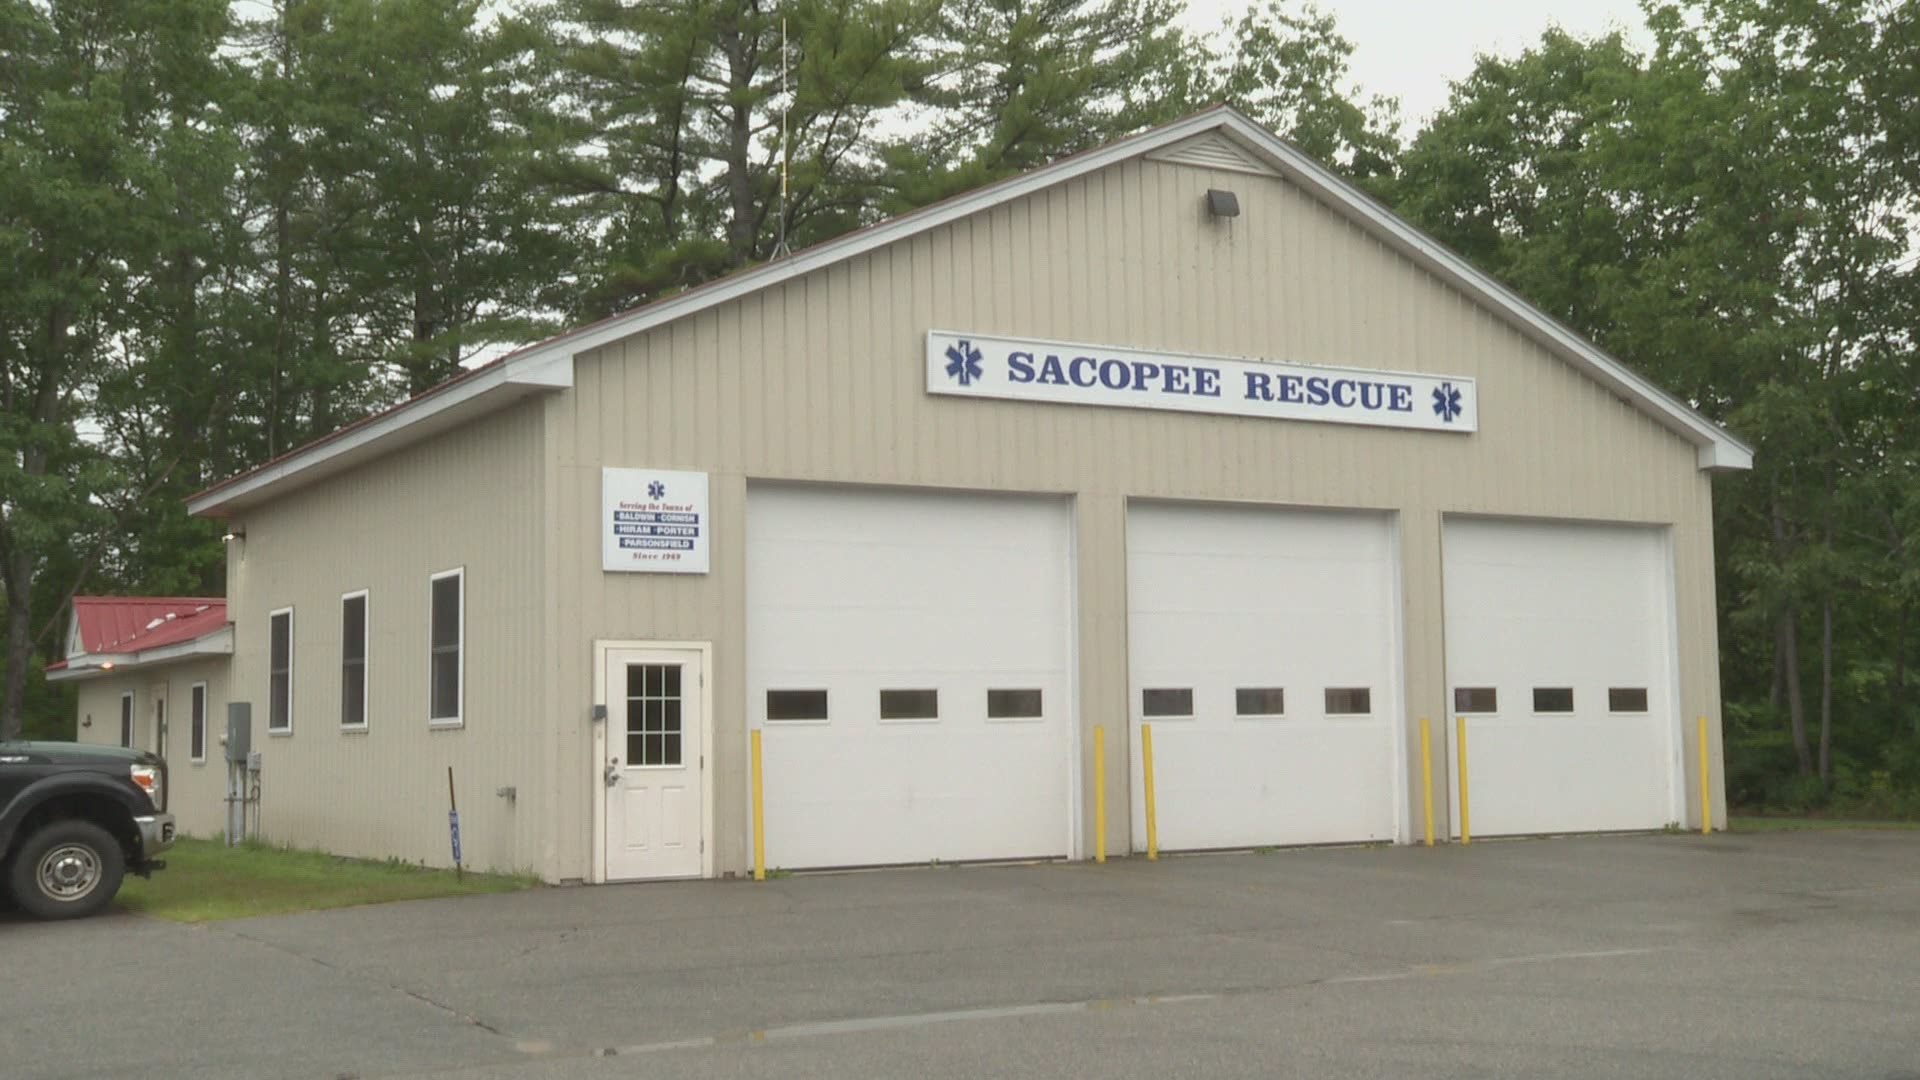 The Maine EMS Board voted to suspend Sacopee Rescue's ability to respond to advanced EMT and paramedic calls due to issues including dried blood on medical equipment